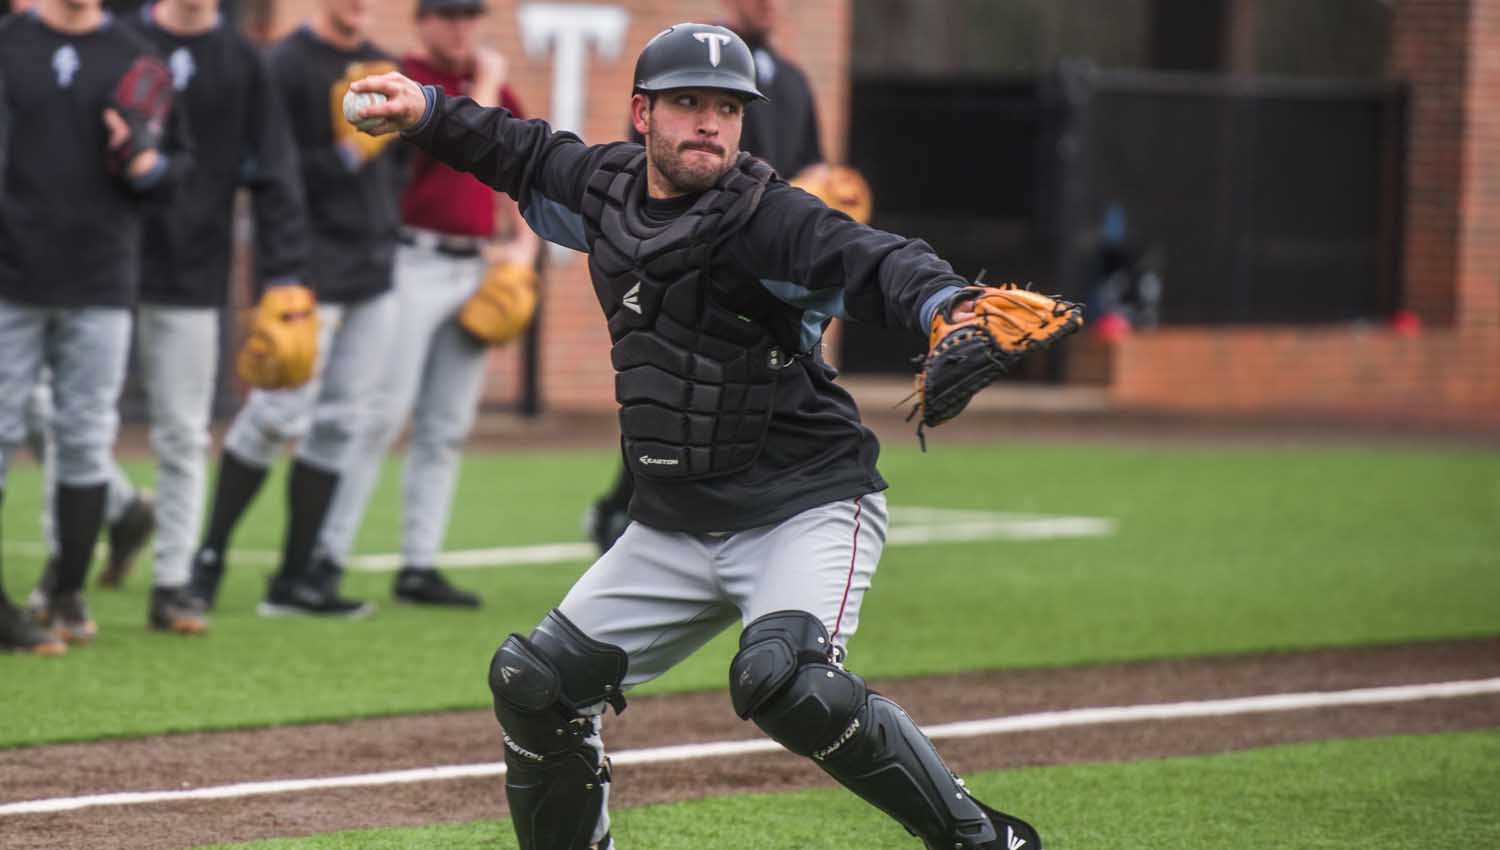 Photo/Jonah enfinger Chase Smartt throws comes out of the crouch as Troy’s catcher on day one of spring practice on Friday afternoon. The Trojans will open up the 2017 season on February 18 against Xavier. 